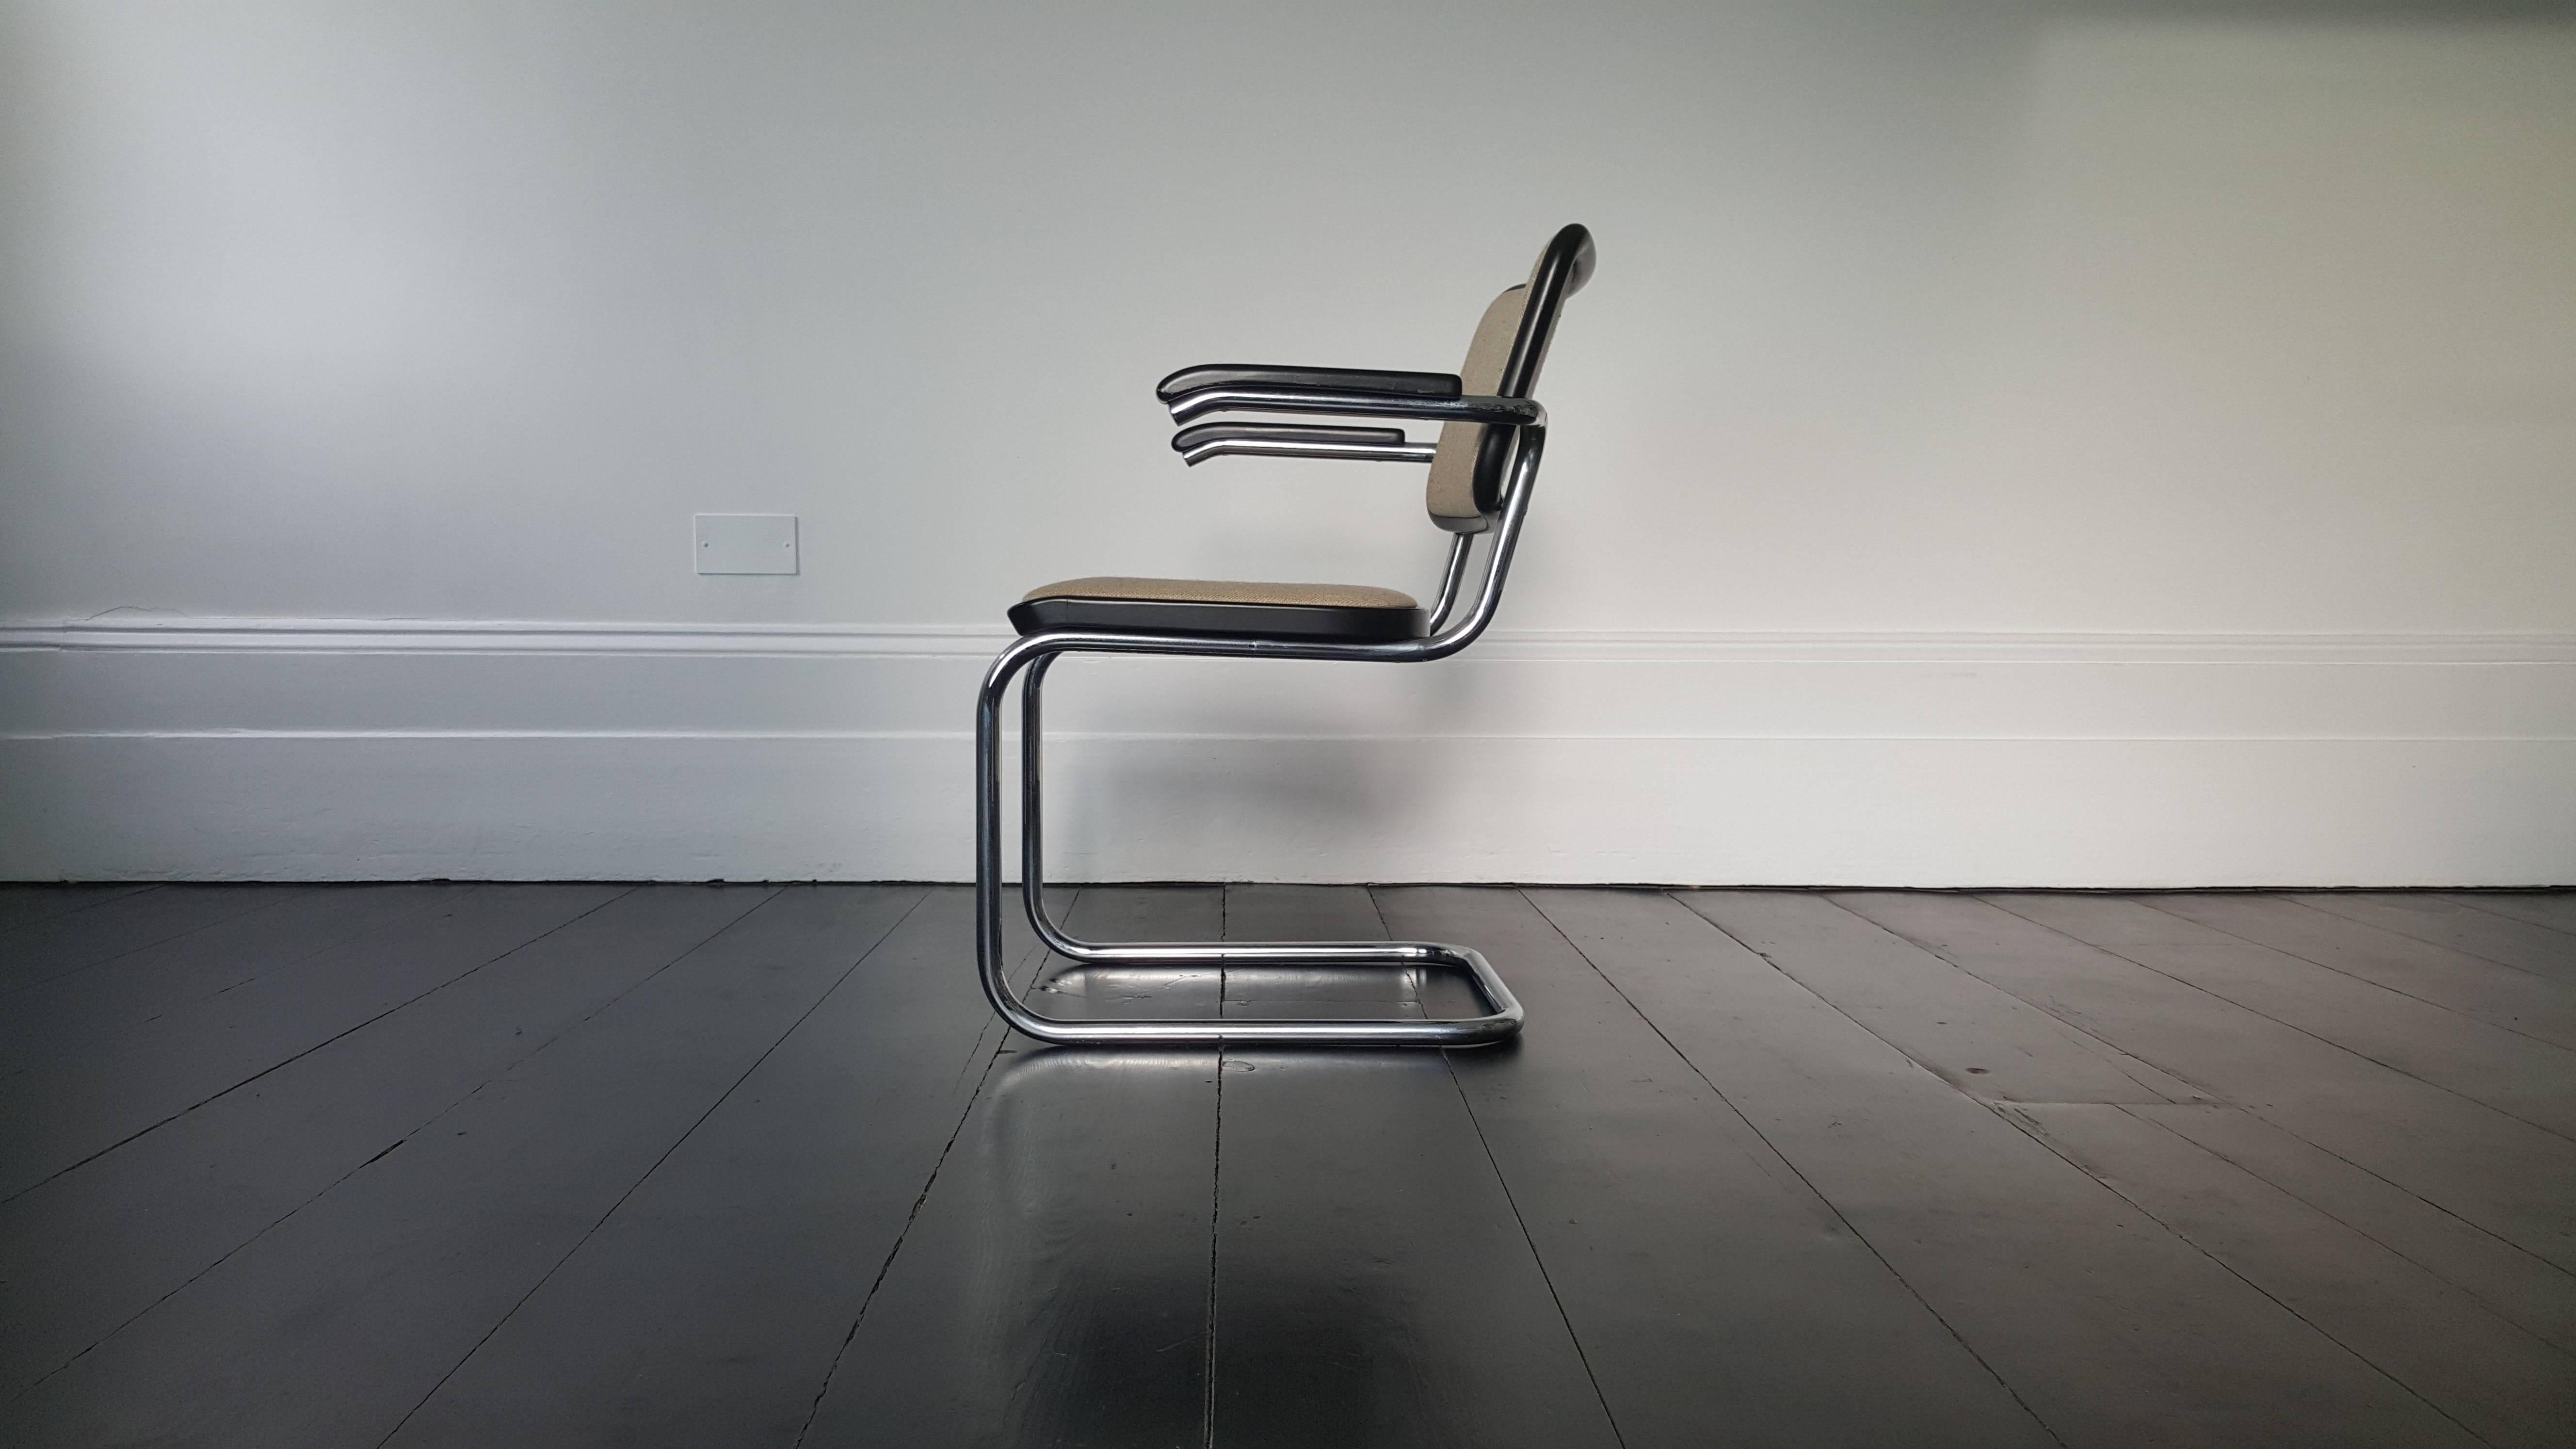 Marcel Breuer was a Hungarian-born modernist, architect and furniture designer.
 
This is one of his most iconic designs, the S 64 consisting of a cantilevered tubular steel frame, black lacquered wood and material upholstery and this original